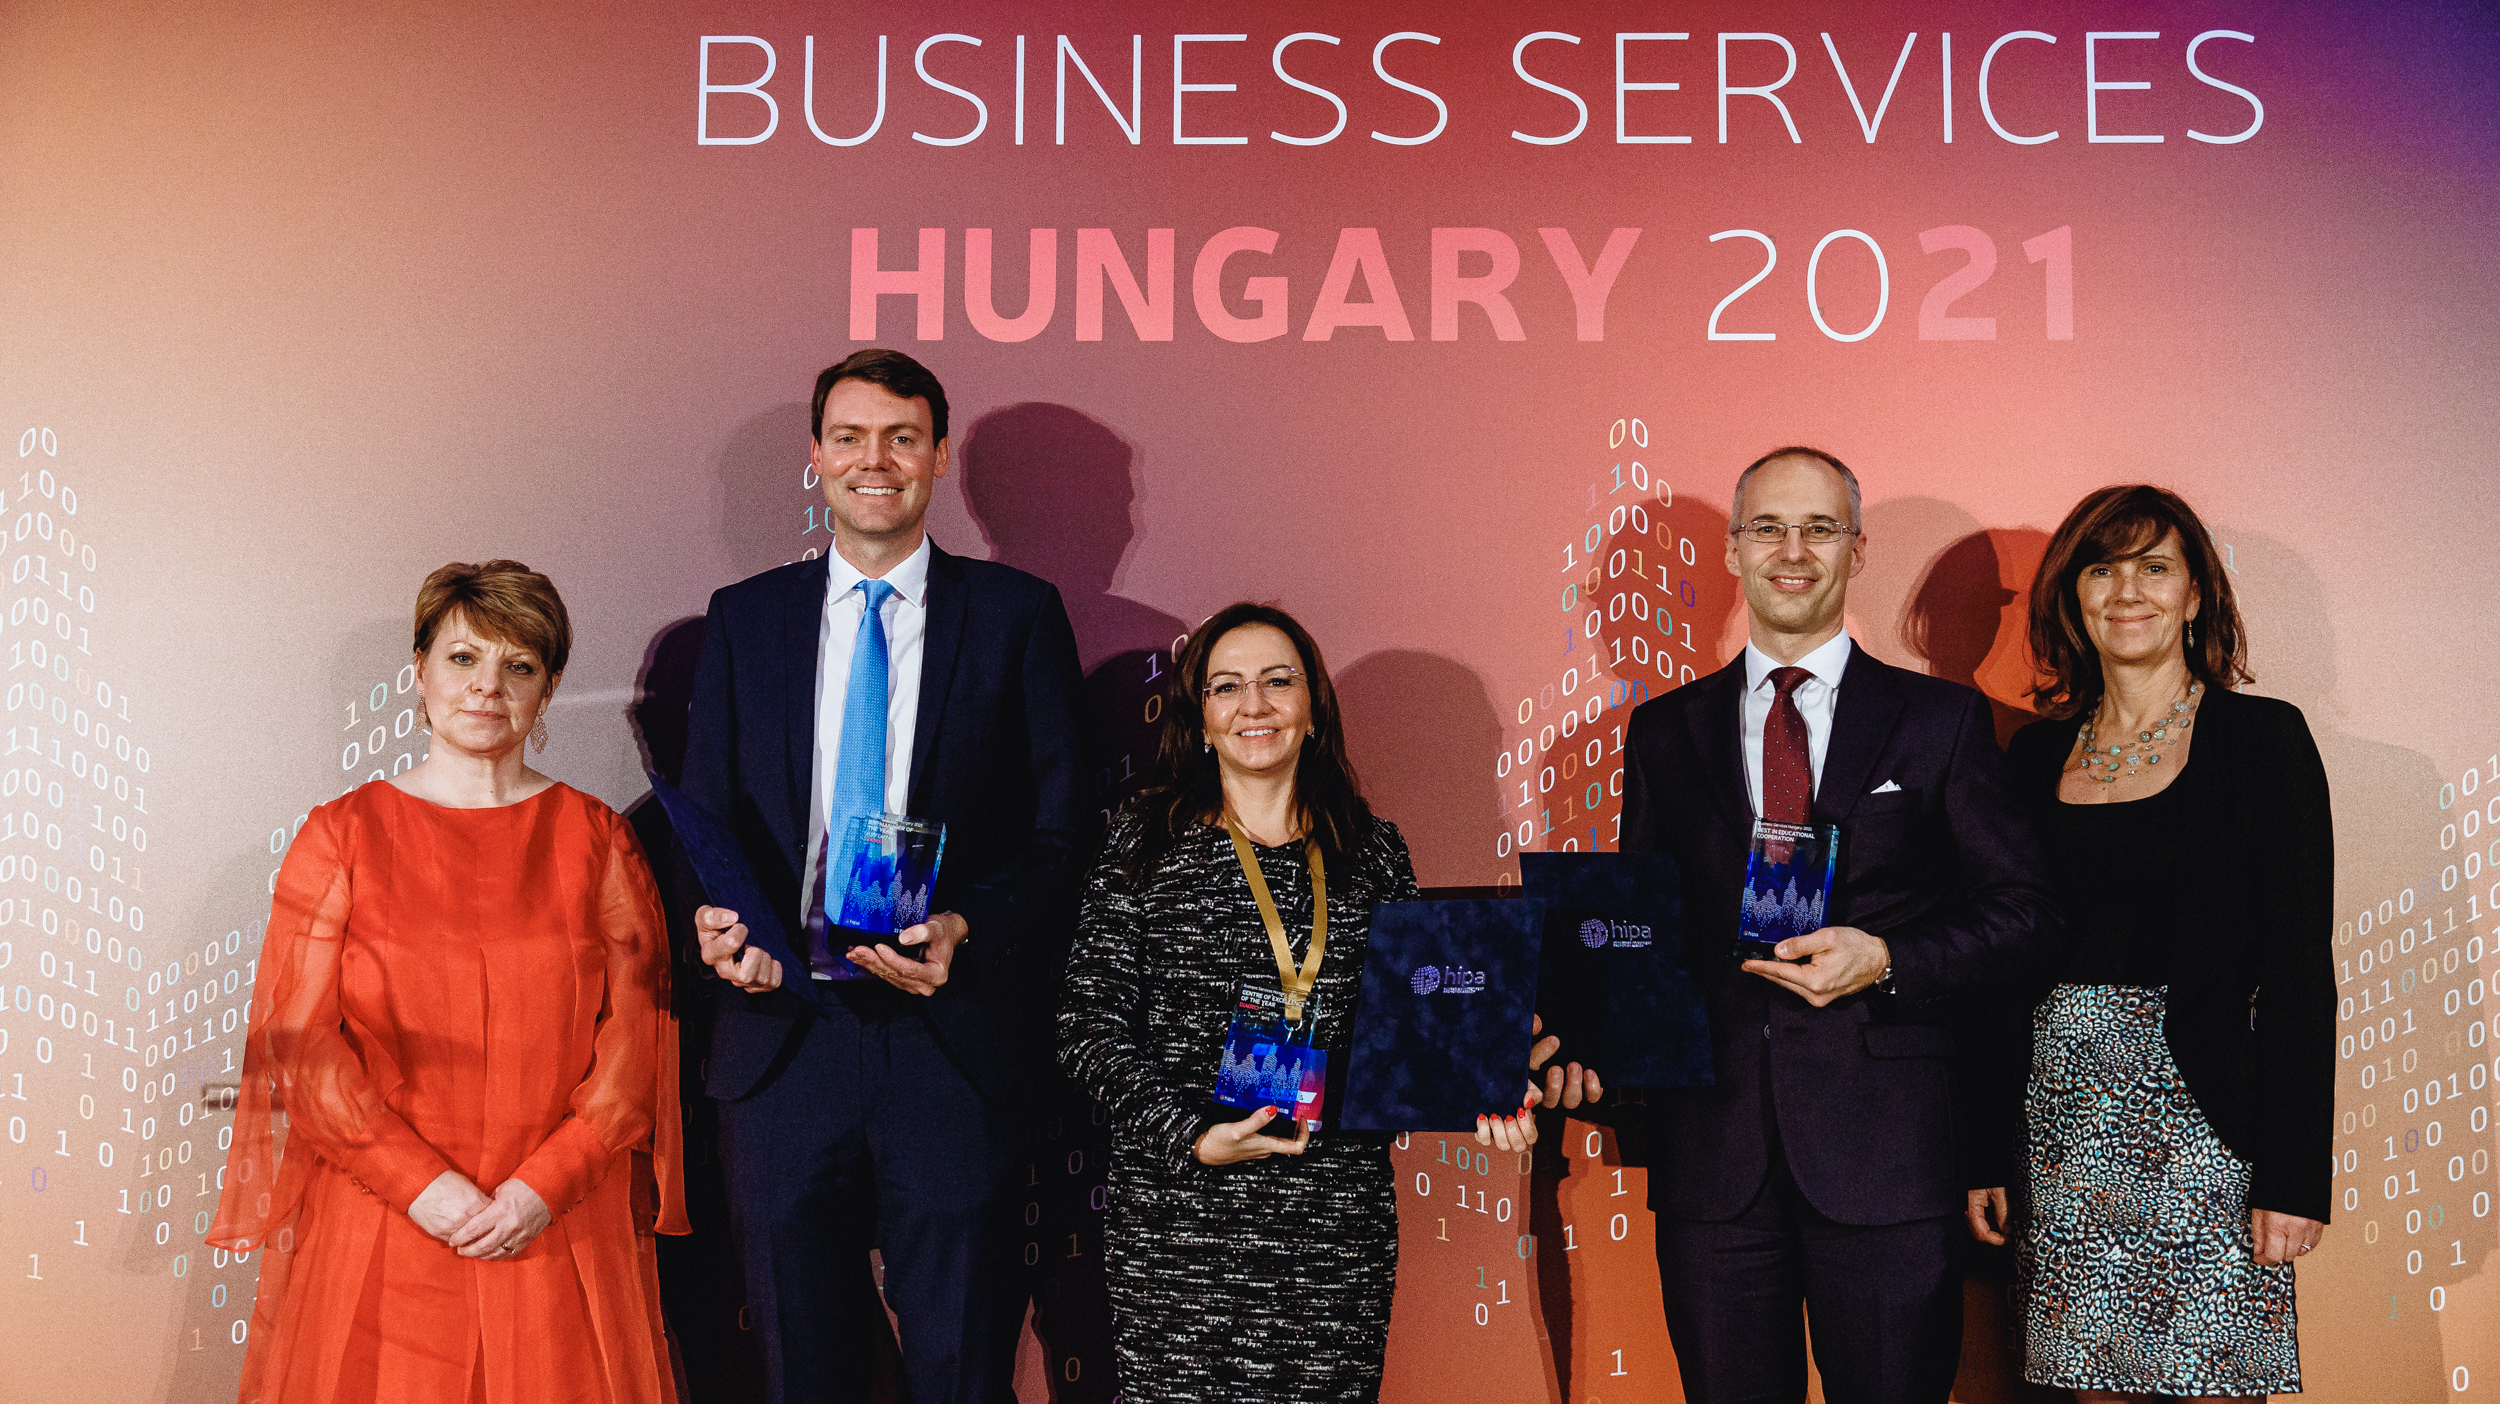 Business Sector Hungary 2021